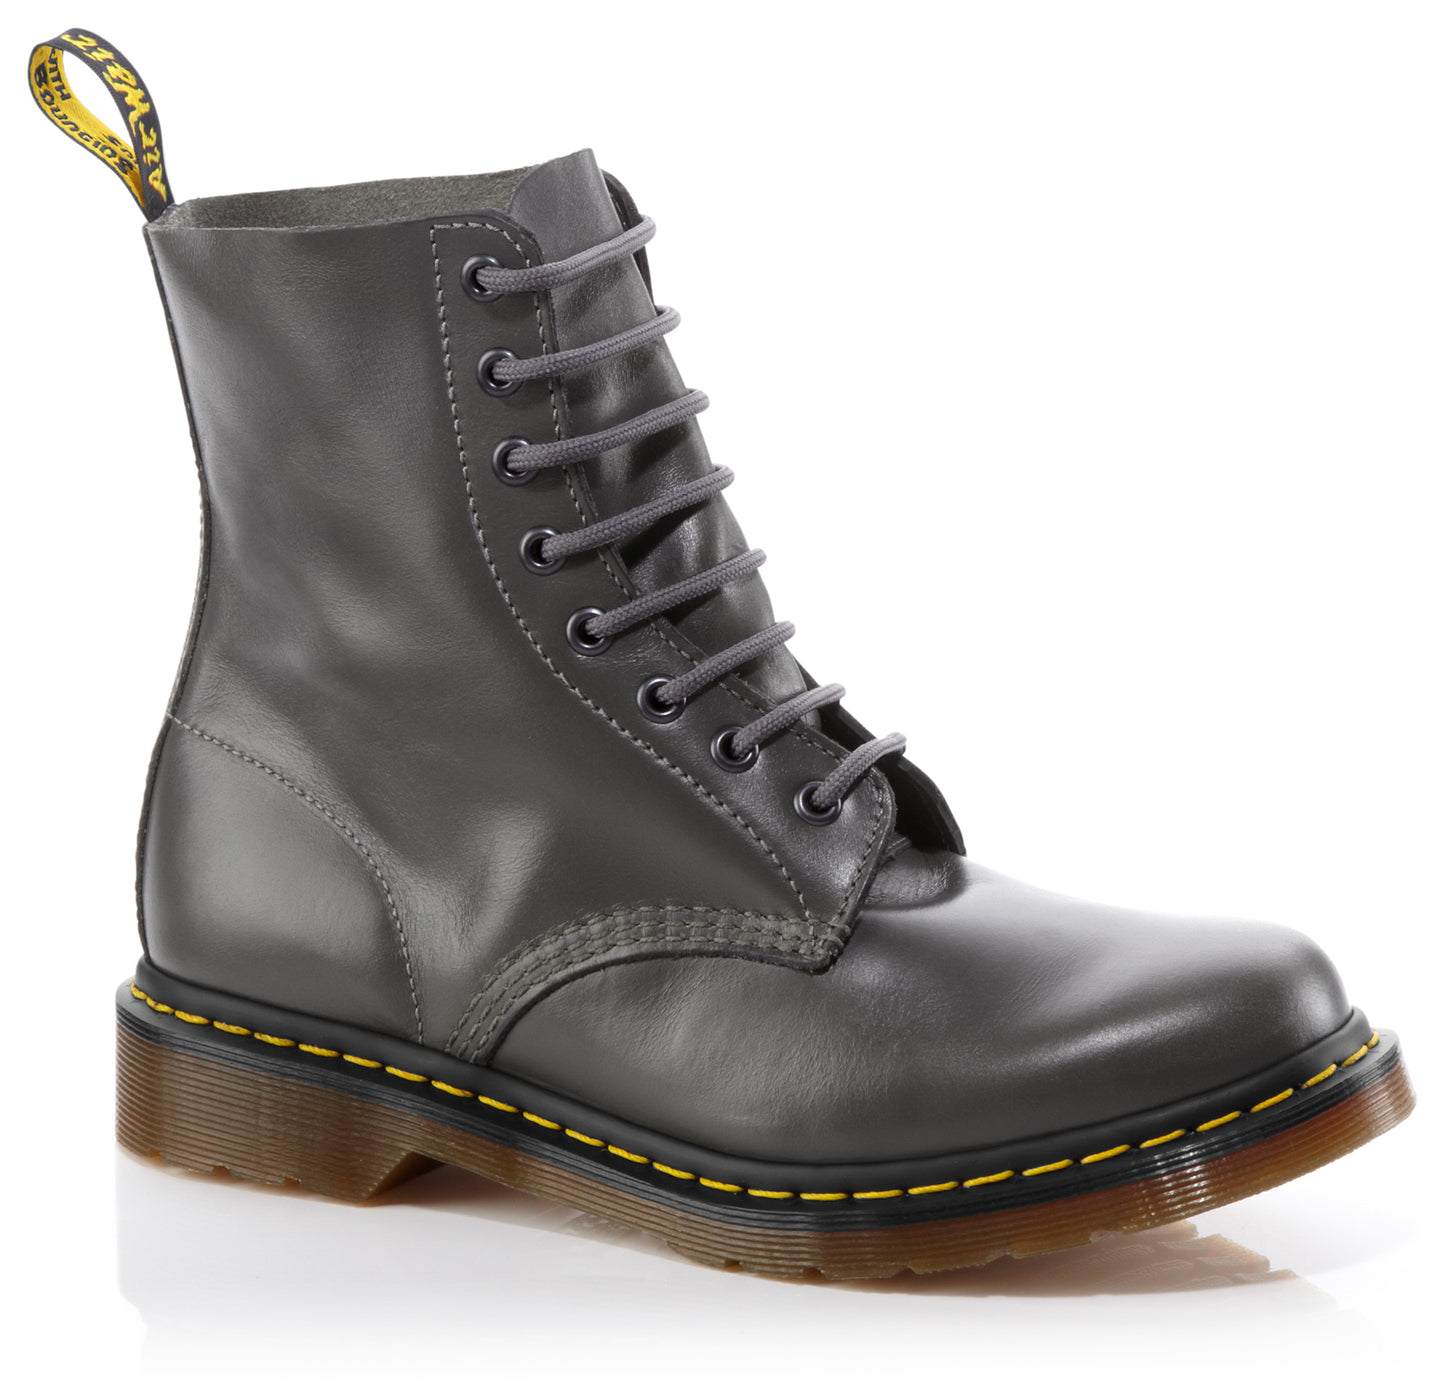 Toevallig patrouille Zwitsers 1460 PASCAL GREY BUTTERO BOOT – Posers Hollywood